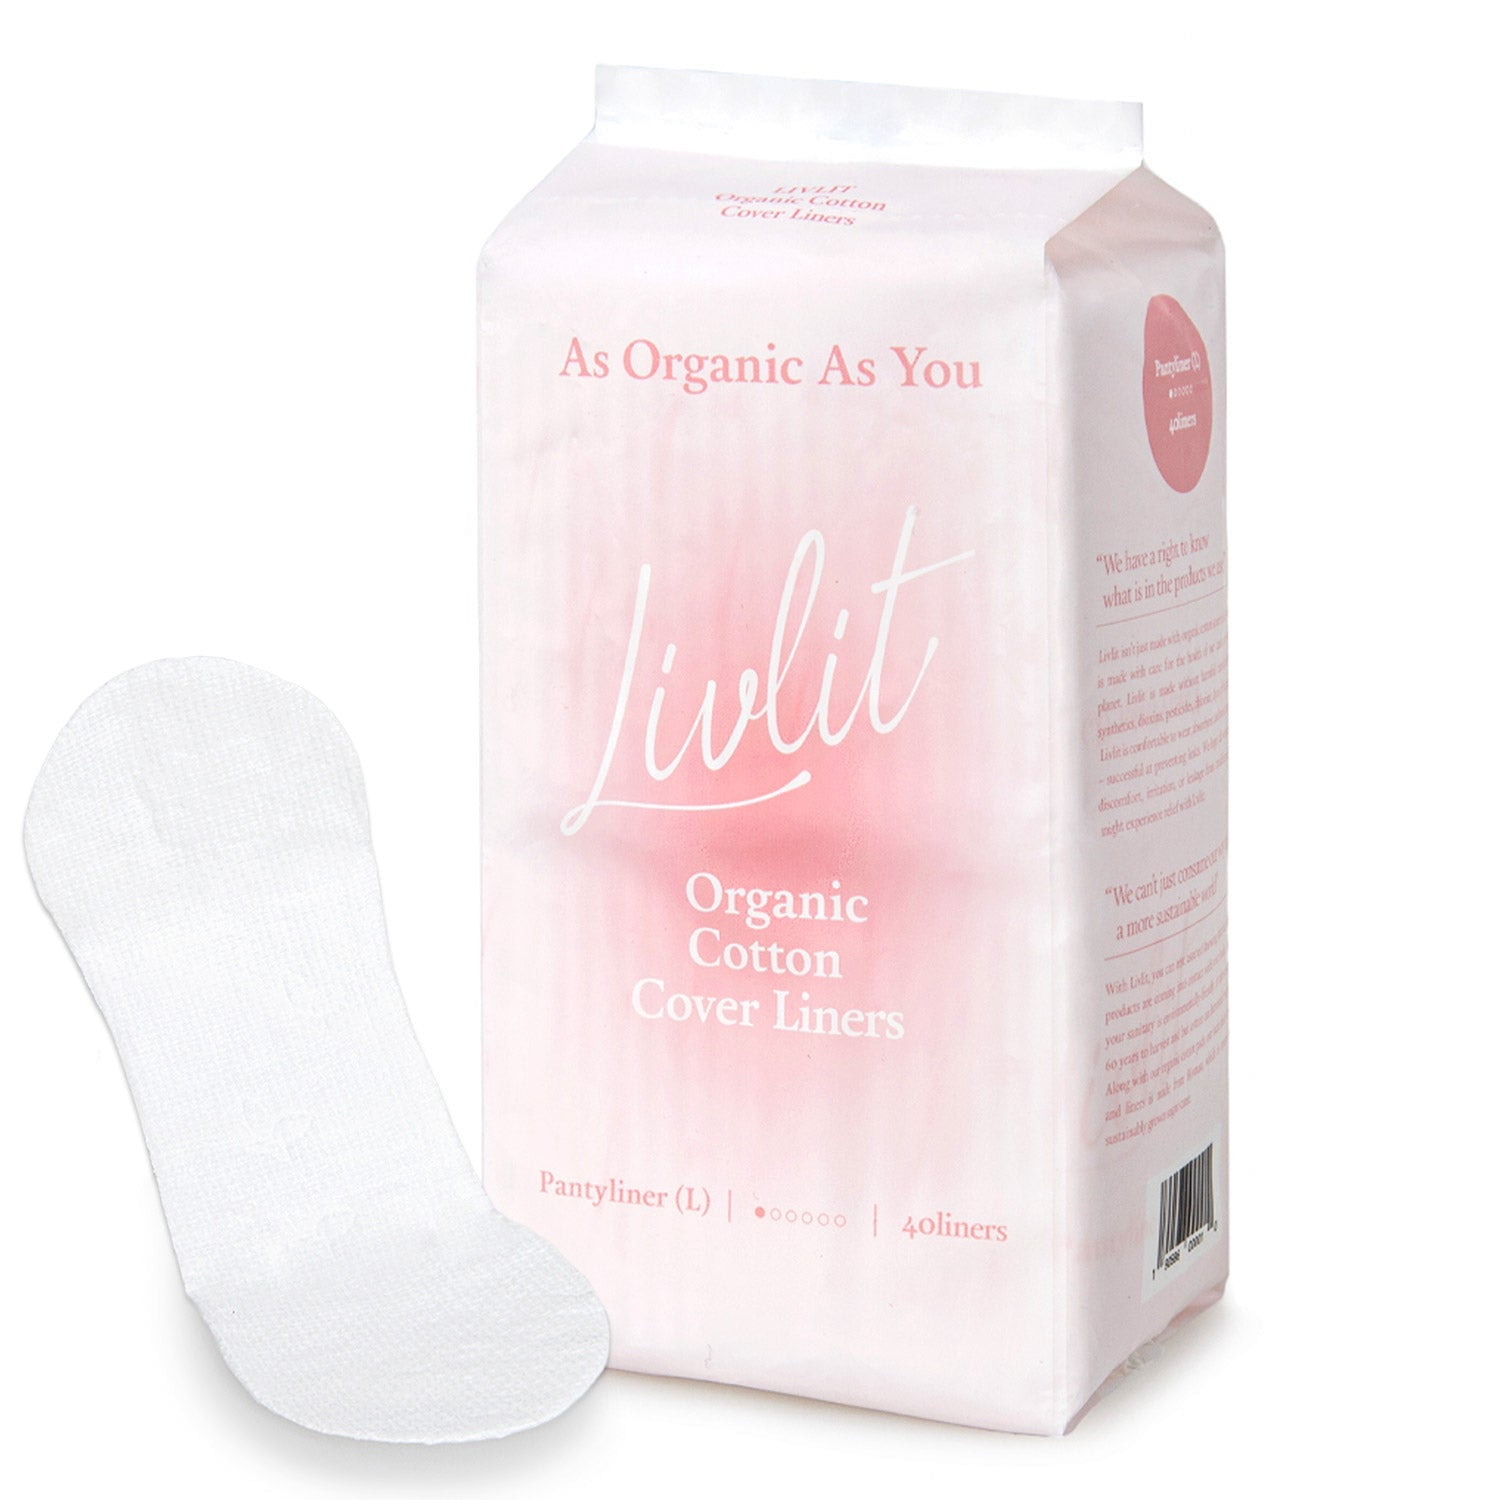 Rael Organic Cotton Long Panty Liners, 40ct - Unscented, Chlorine Free,  Pantiliners - Natural, Daily Pantyliners 